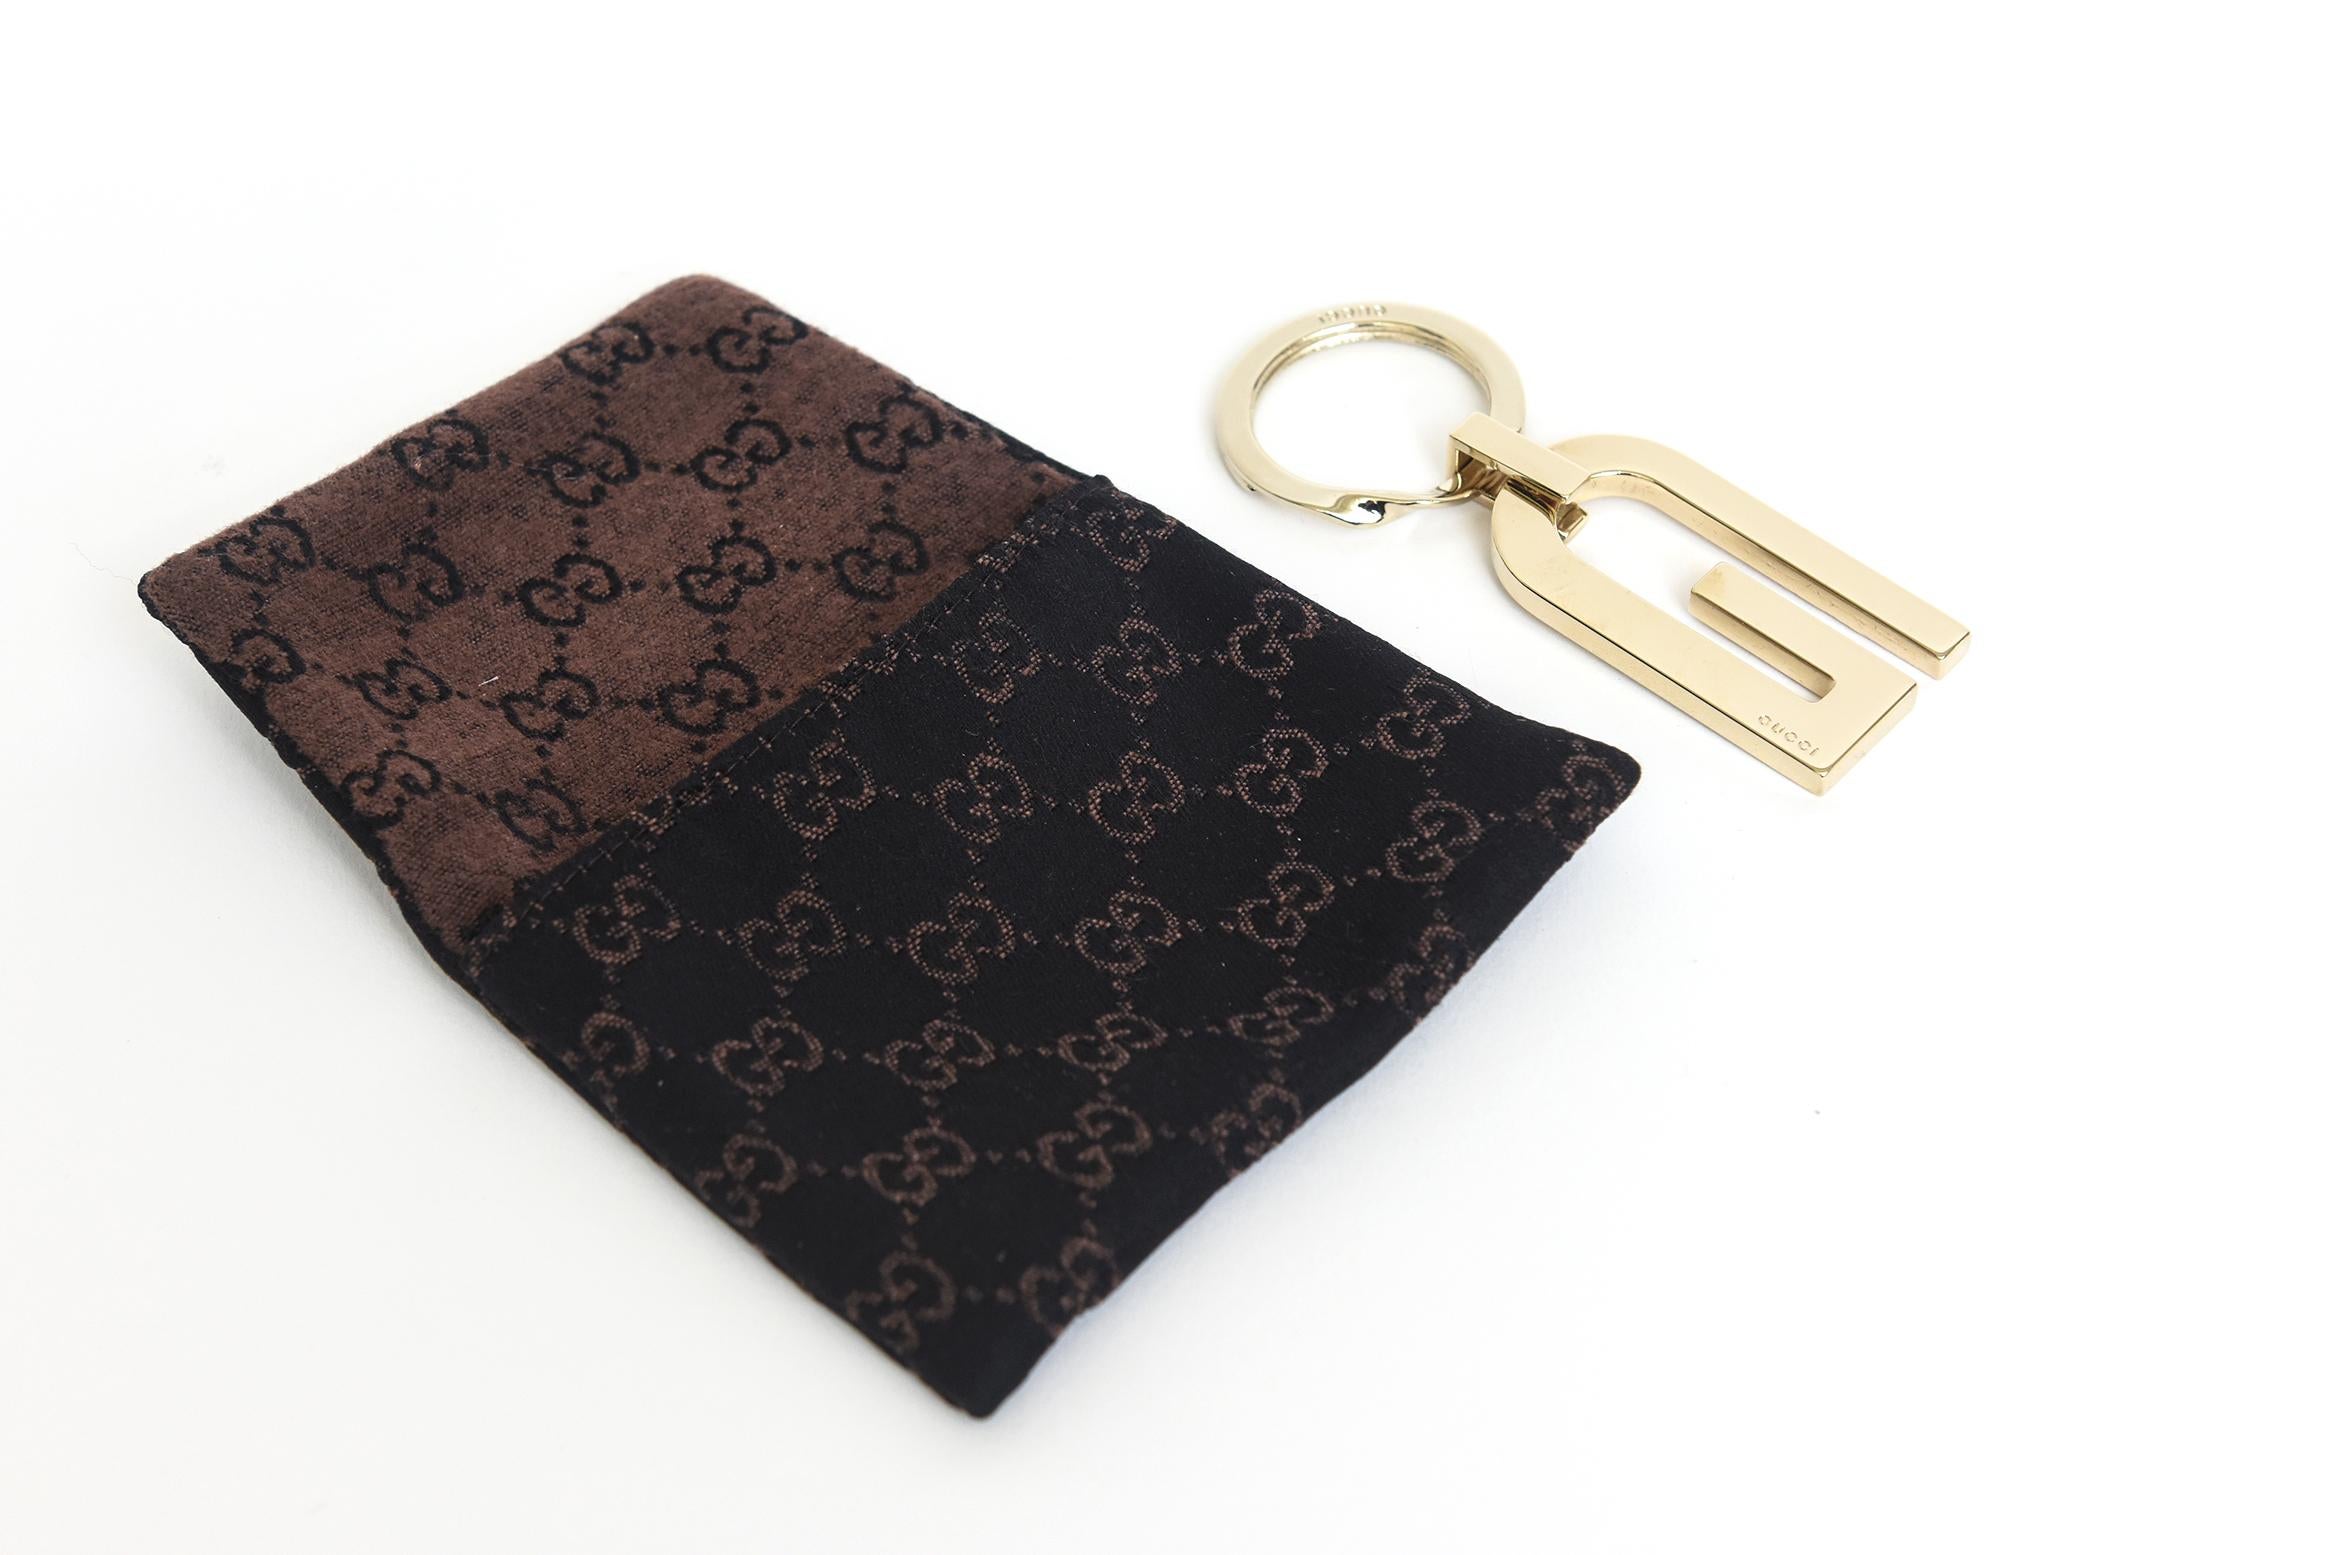 Gucci Vintage Gold Plated Unisex Keychain For Sale 1